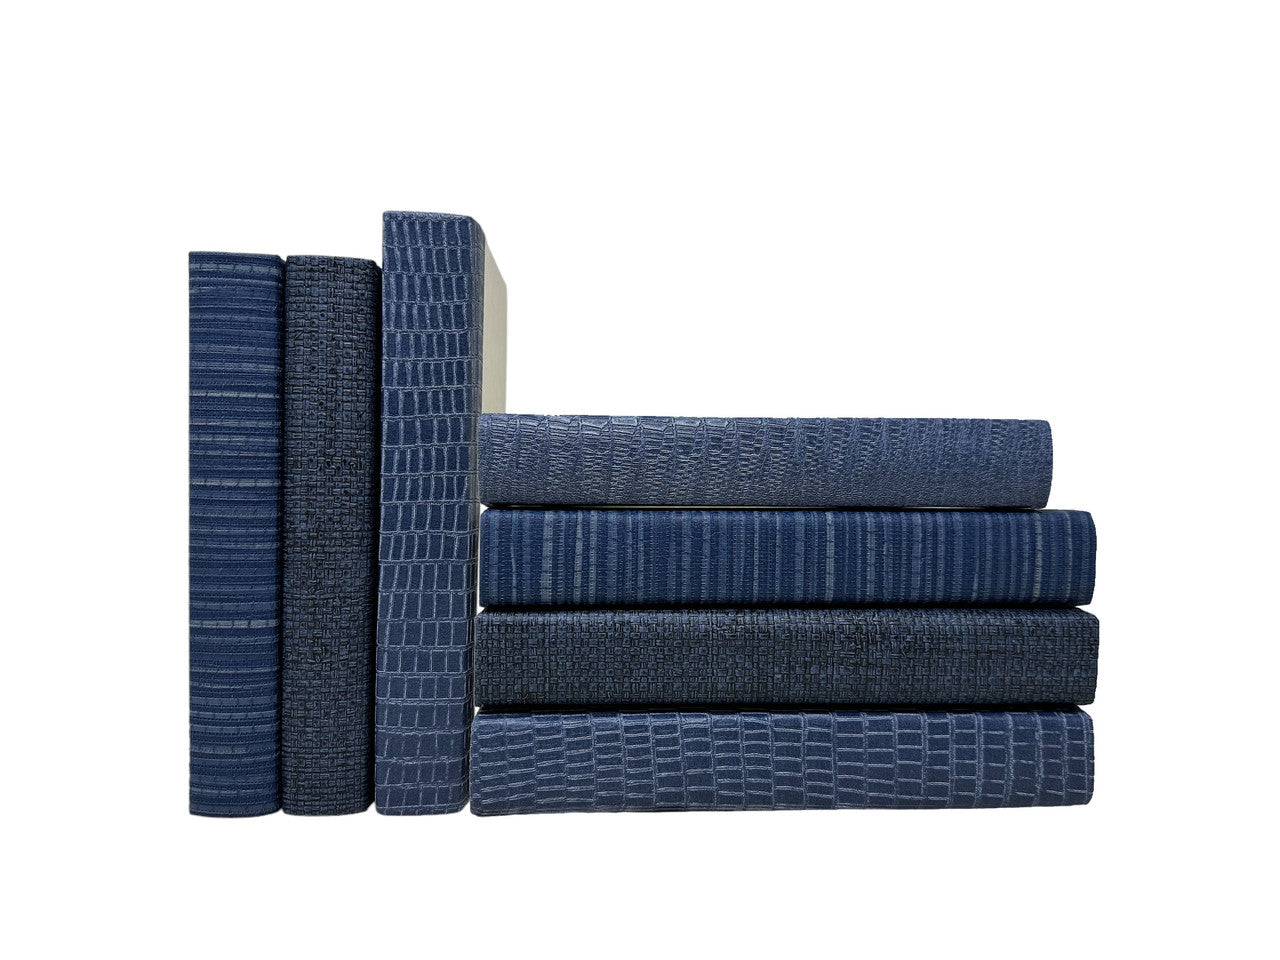 Navy Grasscloths and Reptile Books